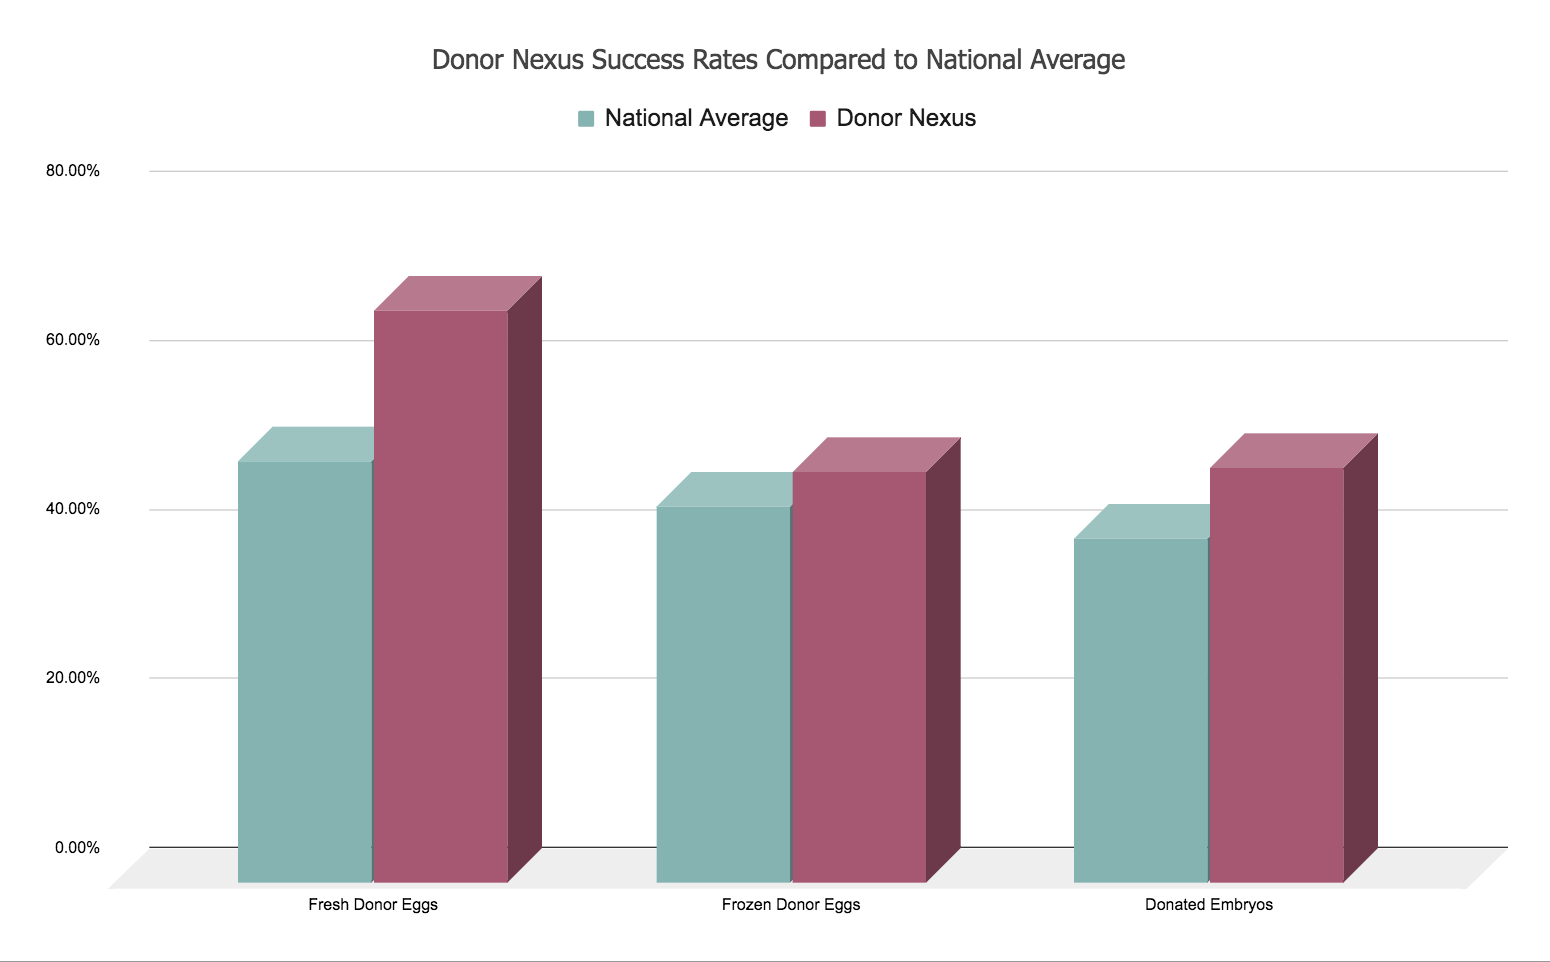 Donor egg success rates for fresh and frozen donor eggs and donor embryos at Donor Nexus compared to national average donor egg IVF success rates.